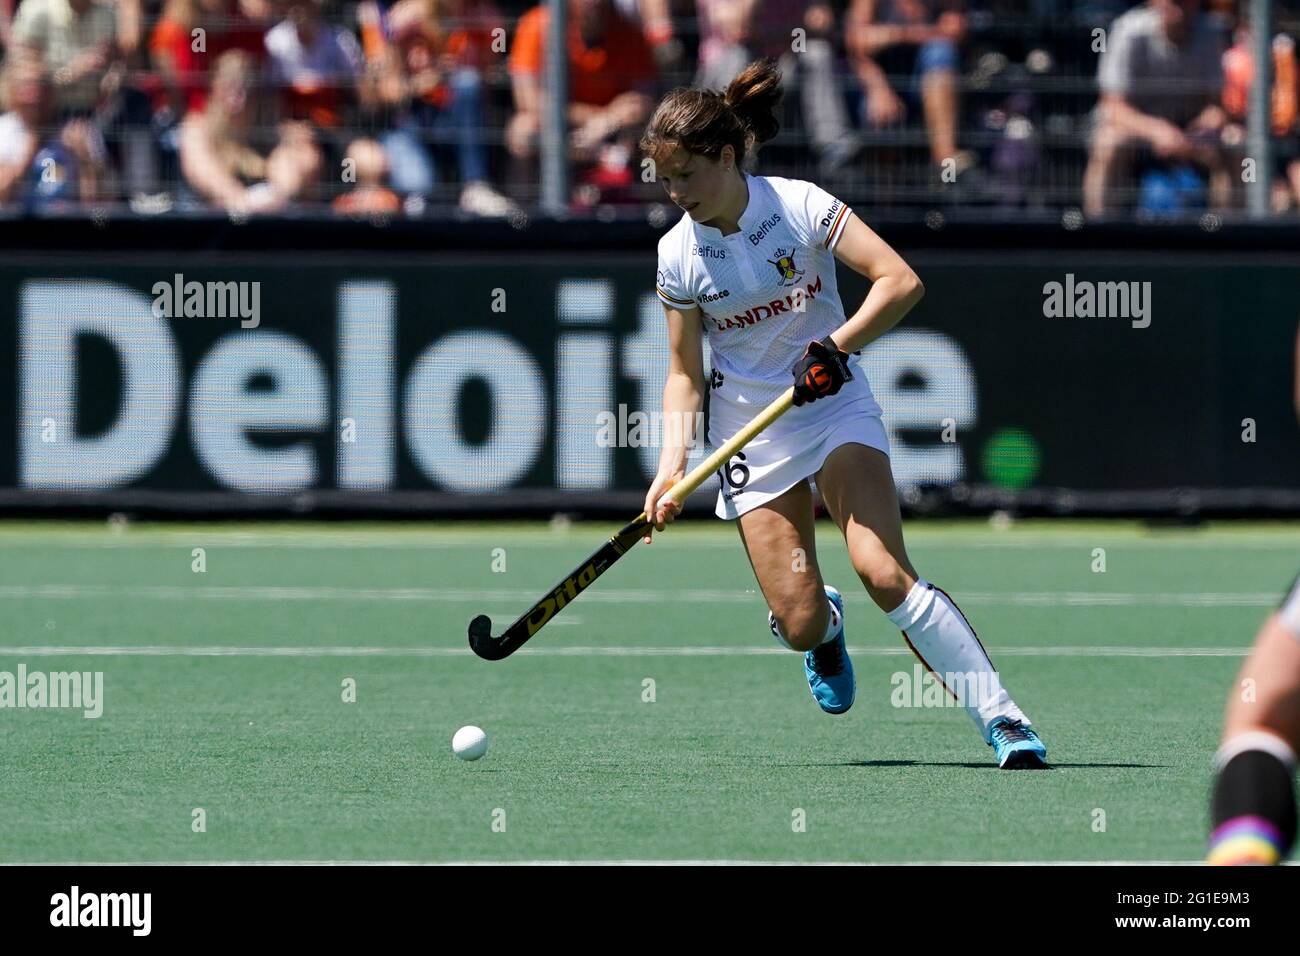 AMSTELVEEN, NETHERLANDS - JUNE 6: Tiphaine Dusquesne of Belgium during the Euro Hockey Championships match between Duitsland and Belgie at Wagener Sta Stock Photo